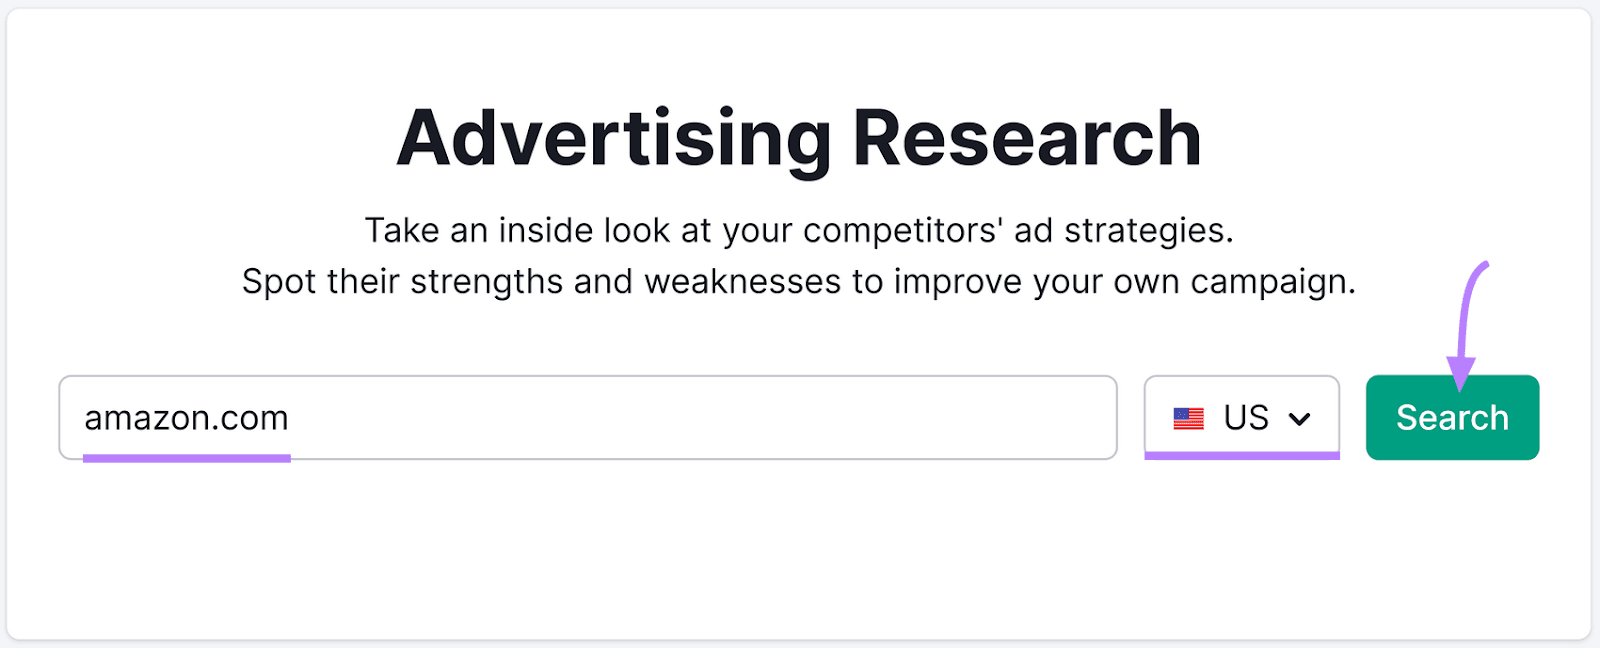 "amazon.com" entered into the Advertising Research search bar